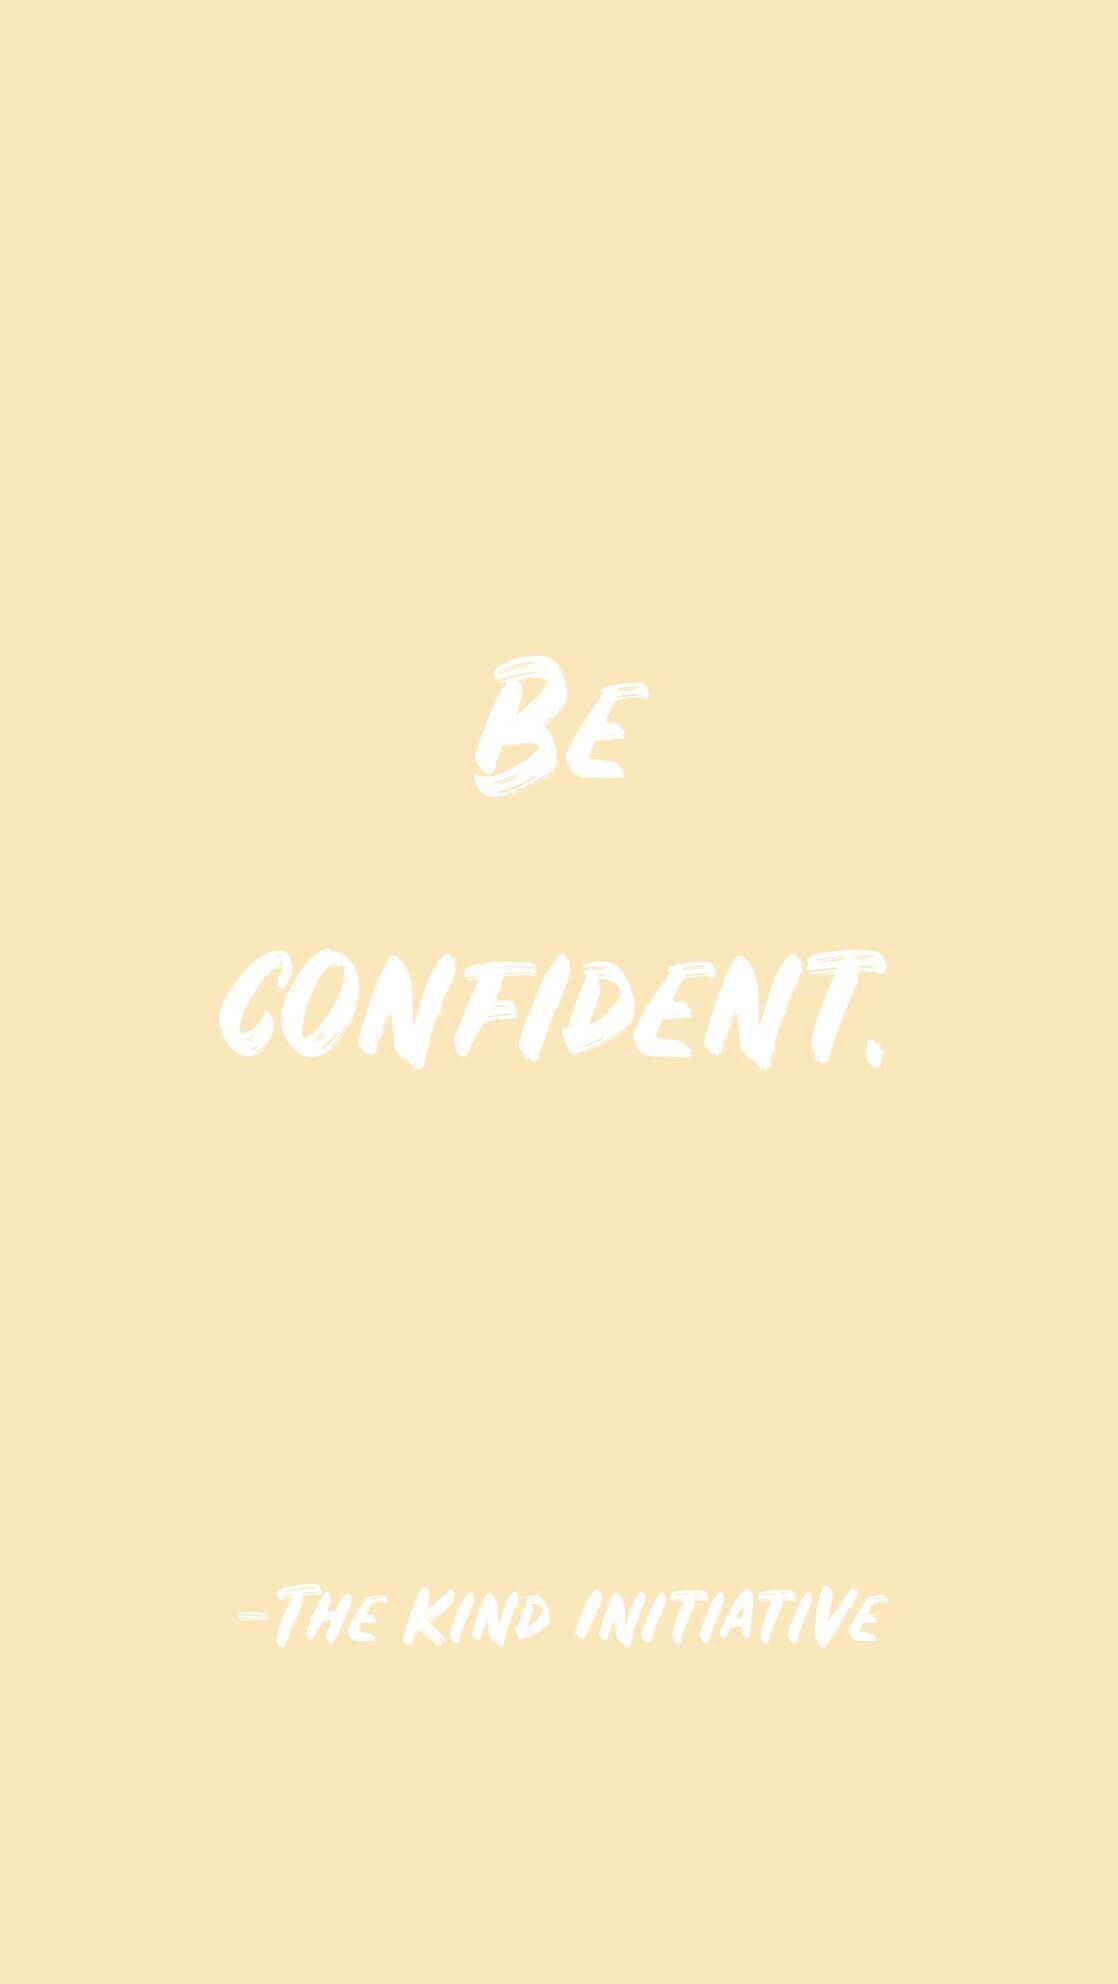 Confidence Wallpaper Free Confidence Background